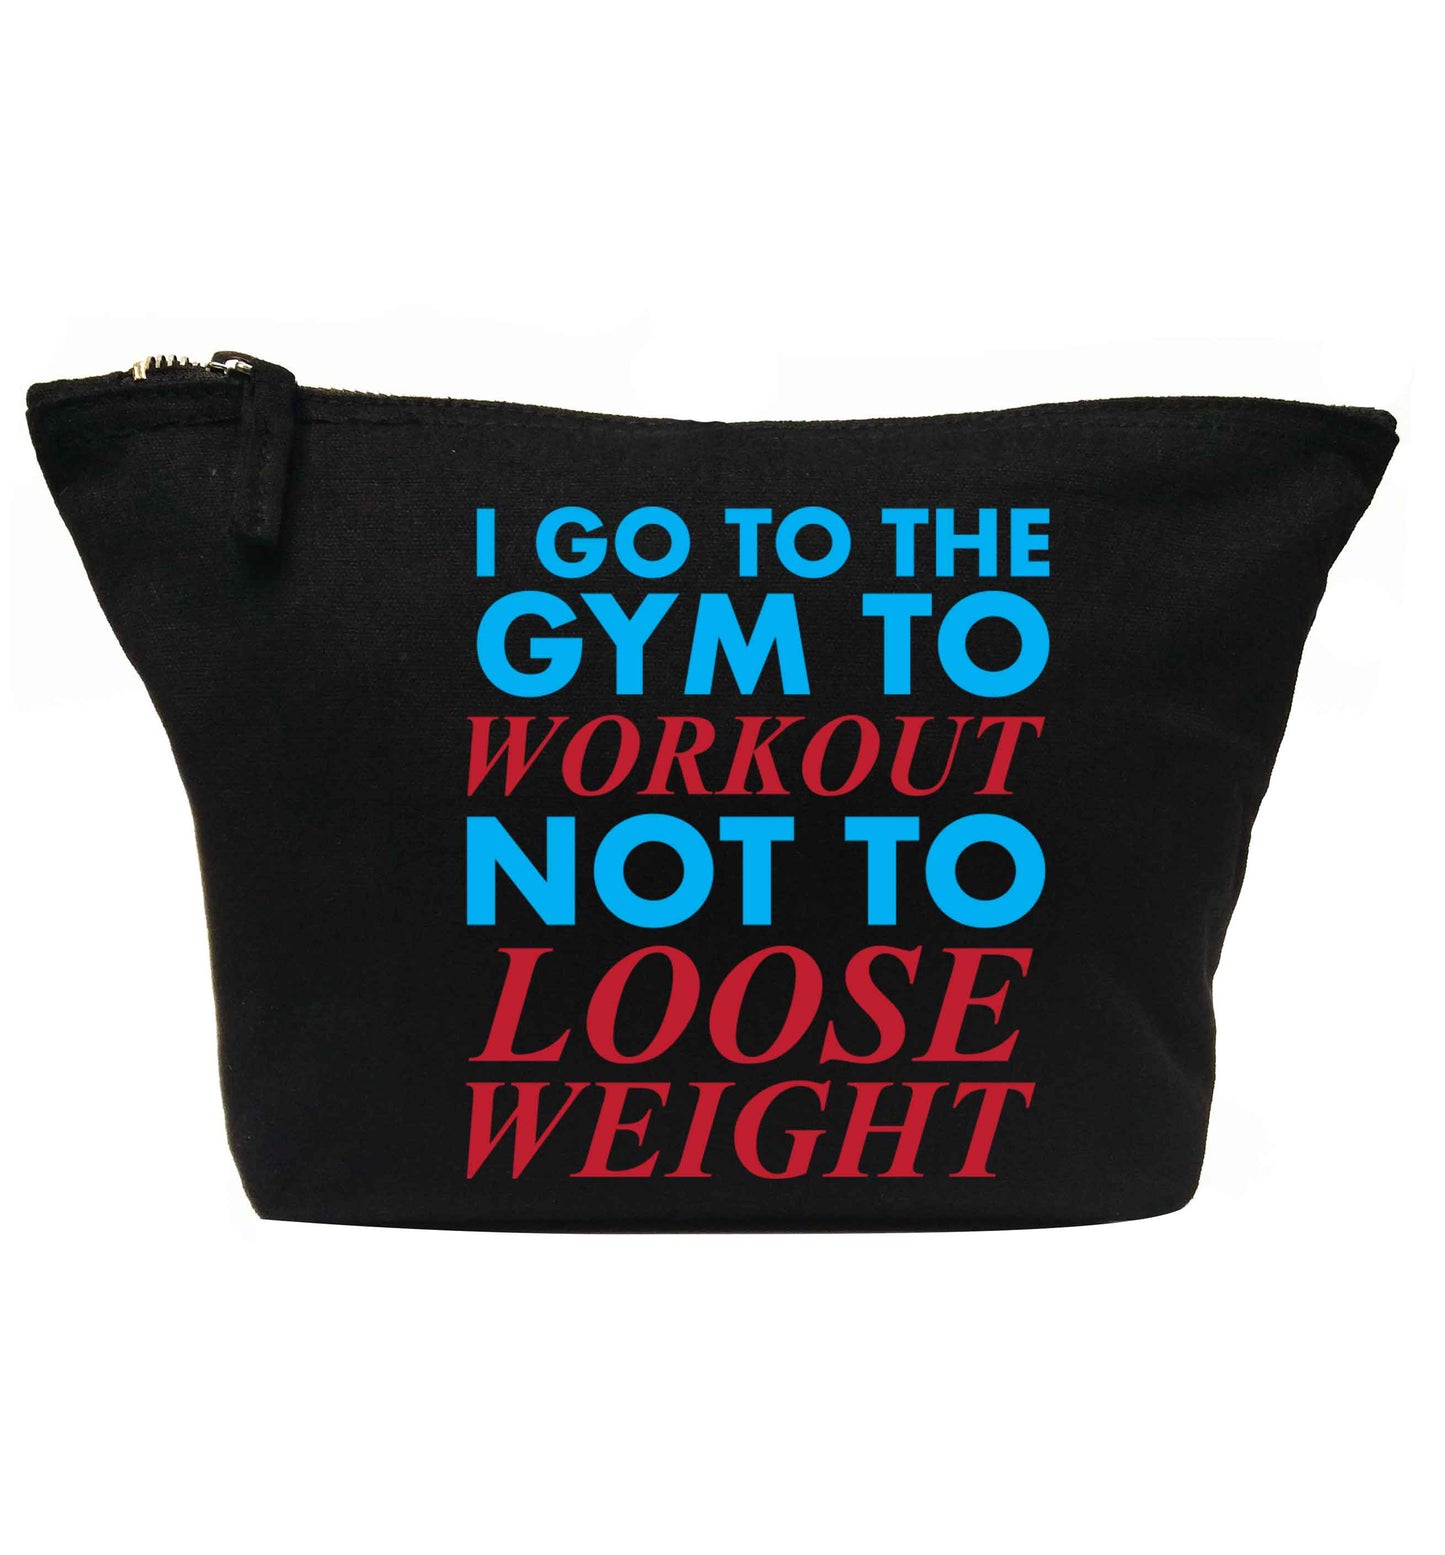 I go to the gym to workout not to loose weight | Makeup / wash bag